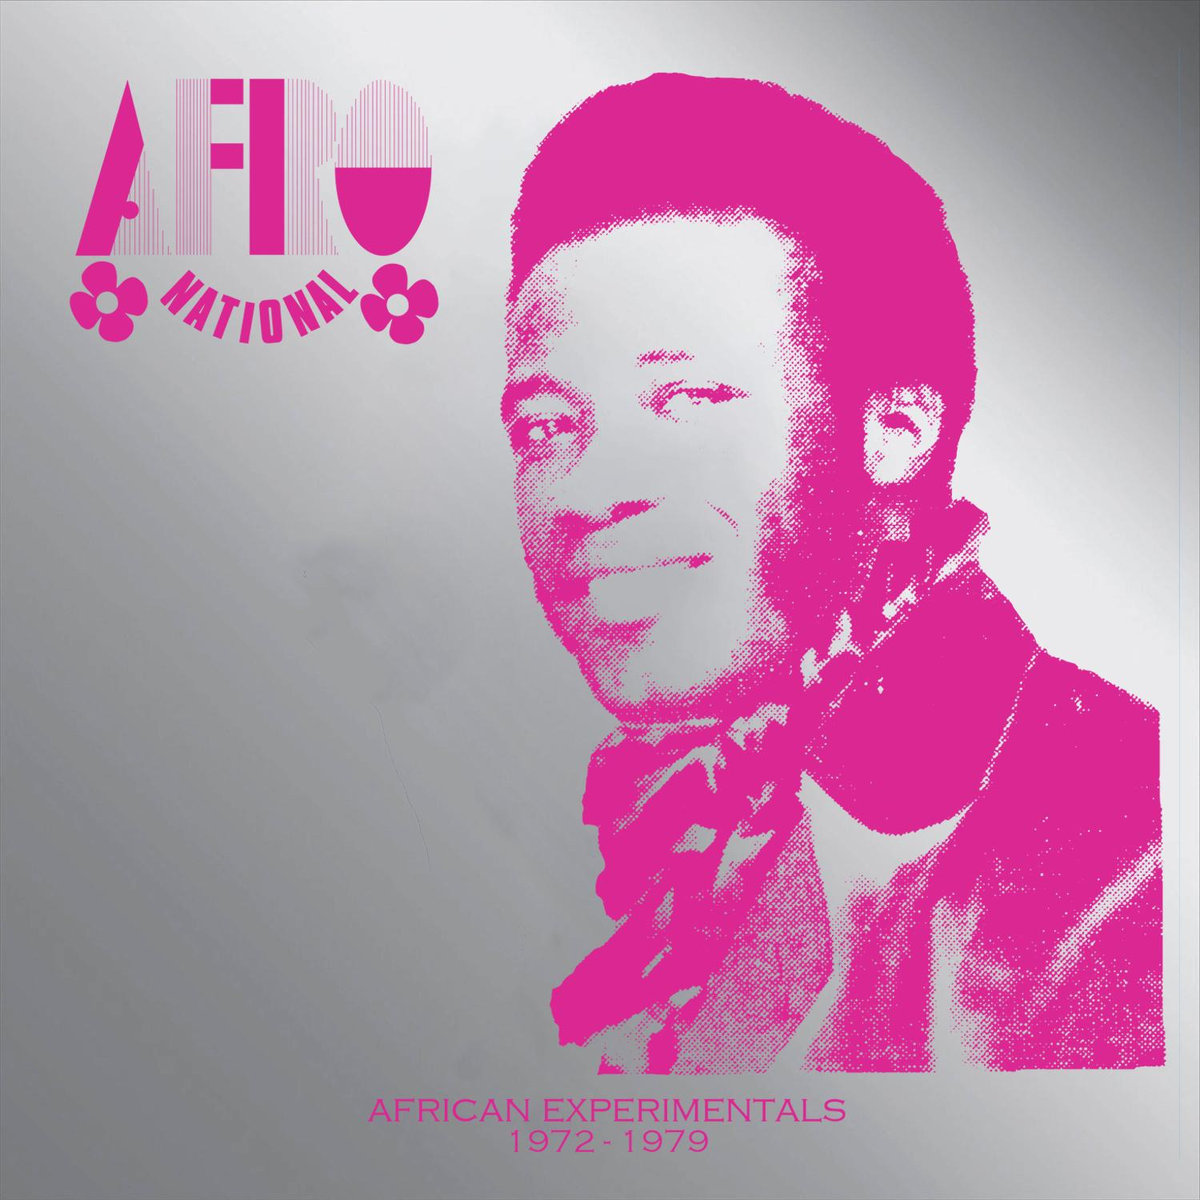 AFRO NATIONAL / アフロ・ナショナル / AFRICAN EXPERIMENTALS 1972-1979